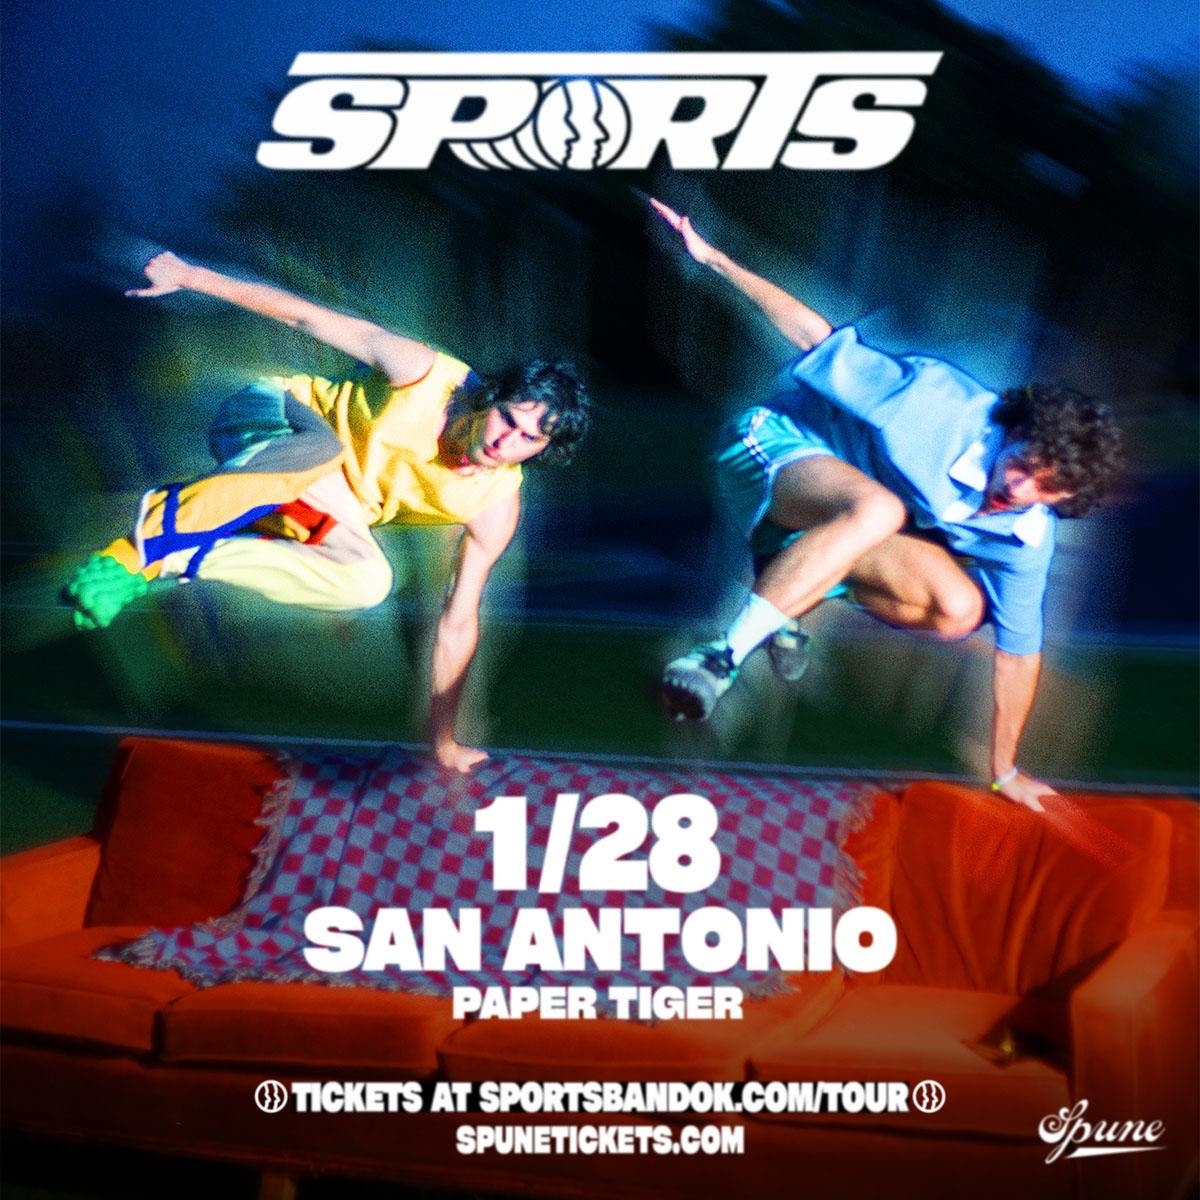 Coming up! Don’t miss out on @sportsband making their Texas rounds this January ⭐️ 1.26 | @tulipsftw 1.27 | @thefaroutaustin 1.28 | @papertigersatx 🎫Tickets: prekindle.com/events/spune